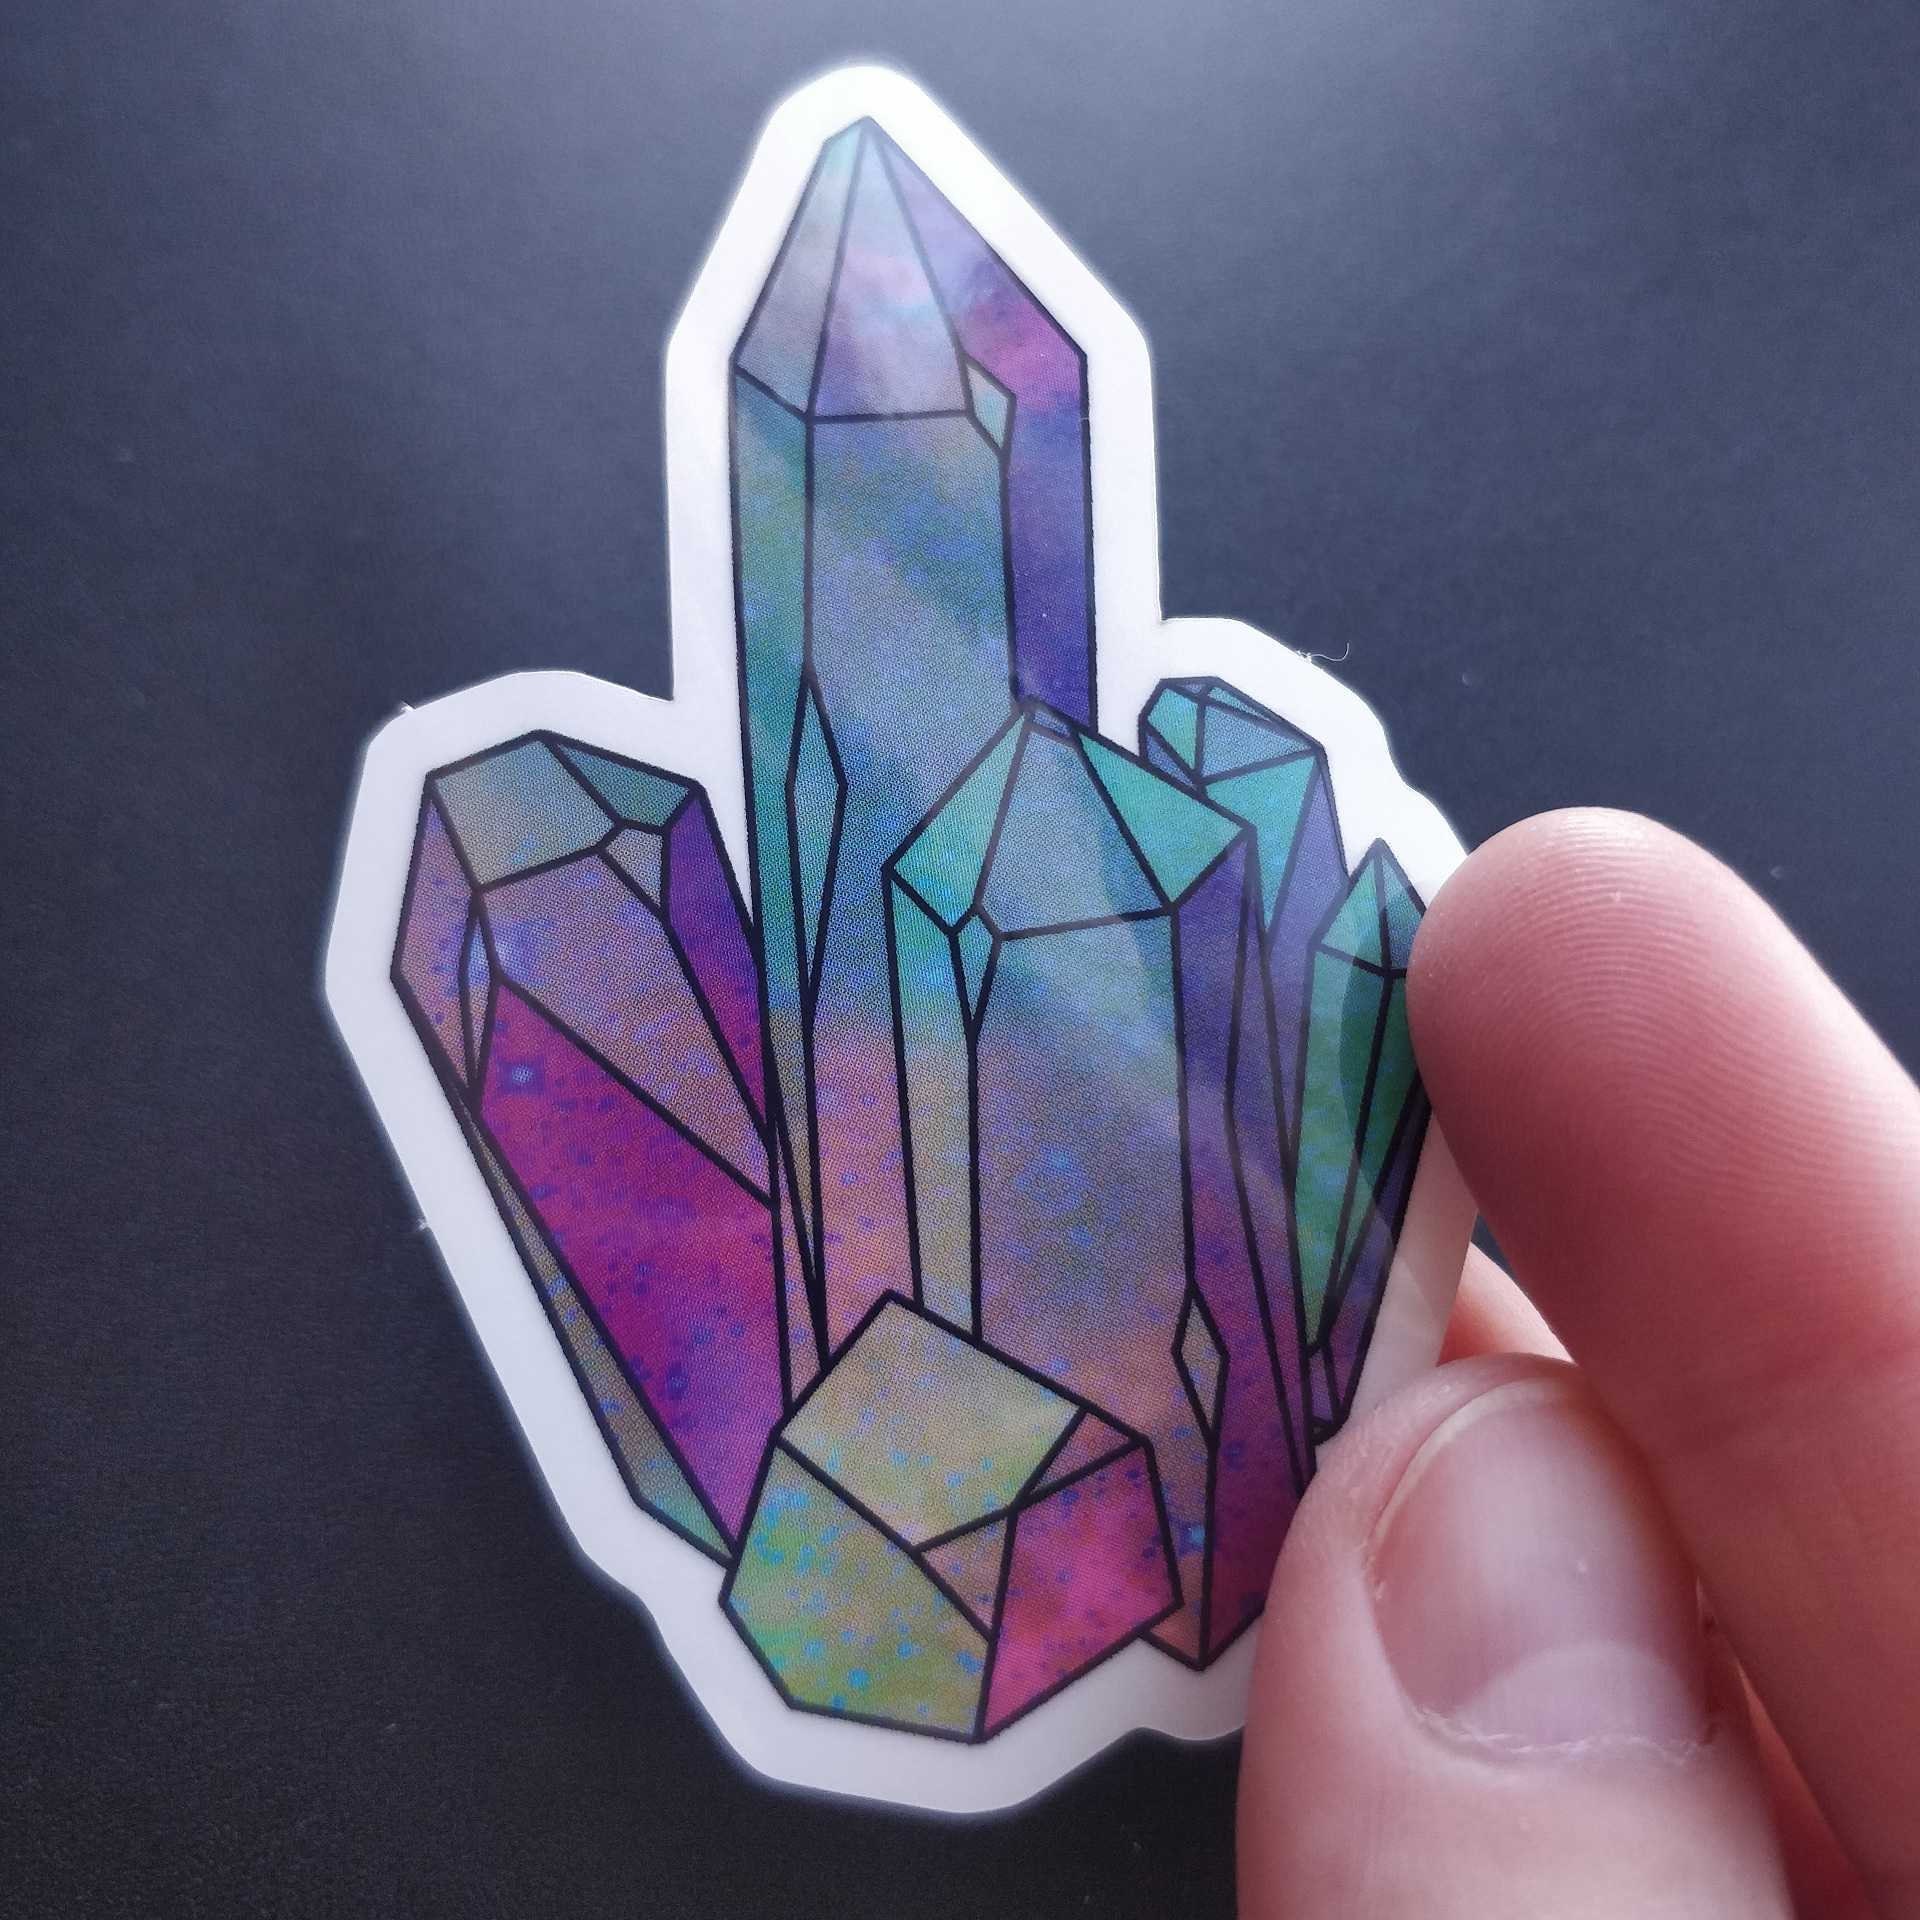 Mini Crystal Stickers Pack Version 2 – Cosmic Geology Crystals